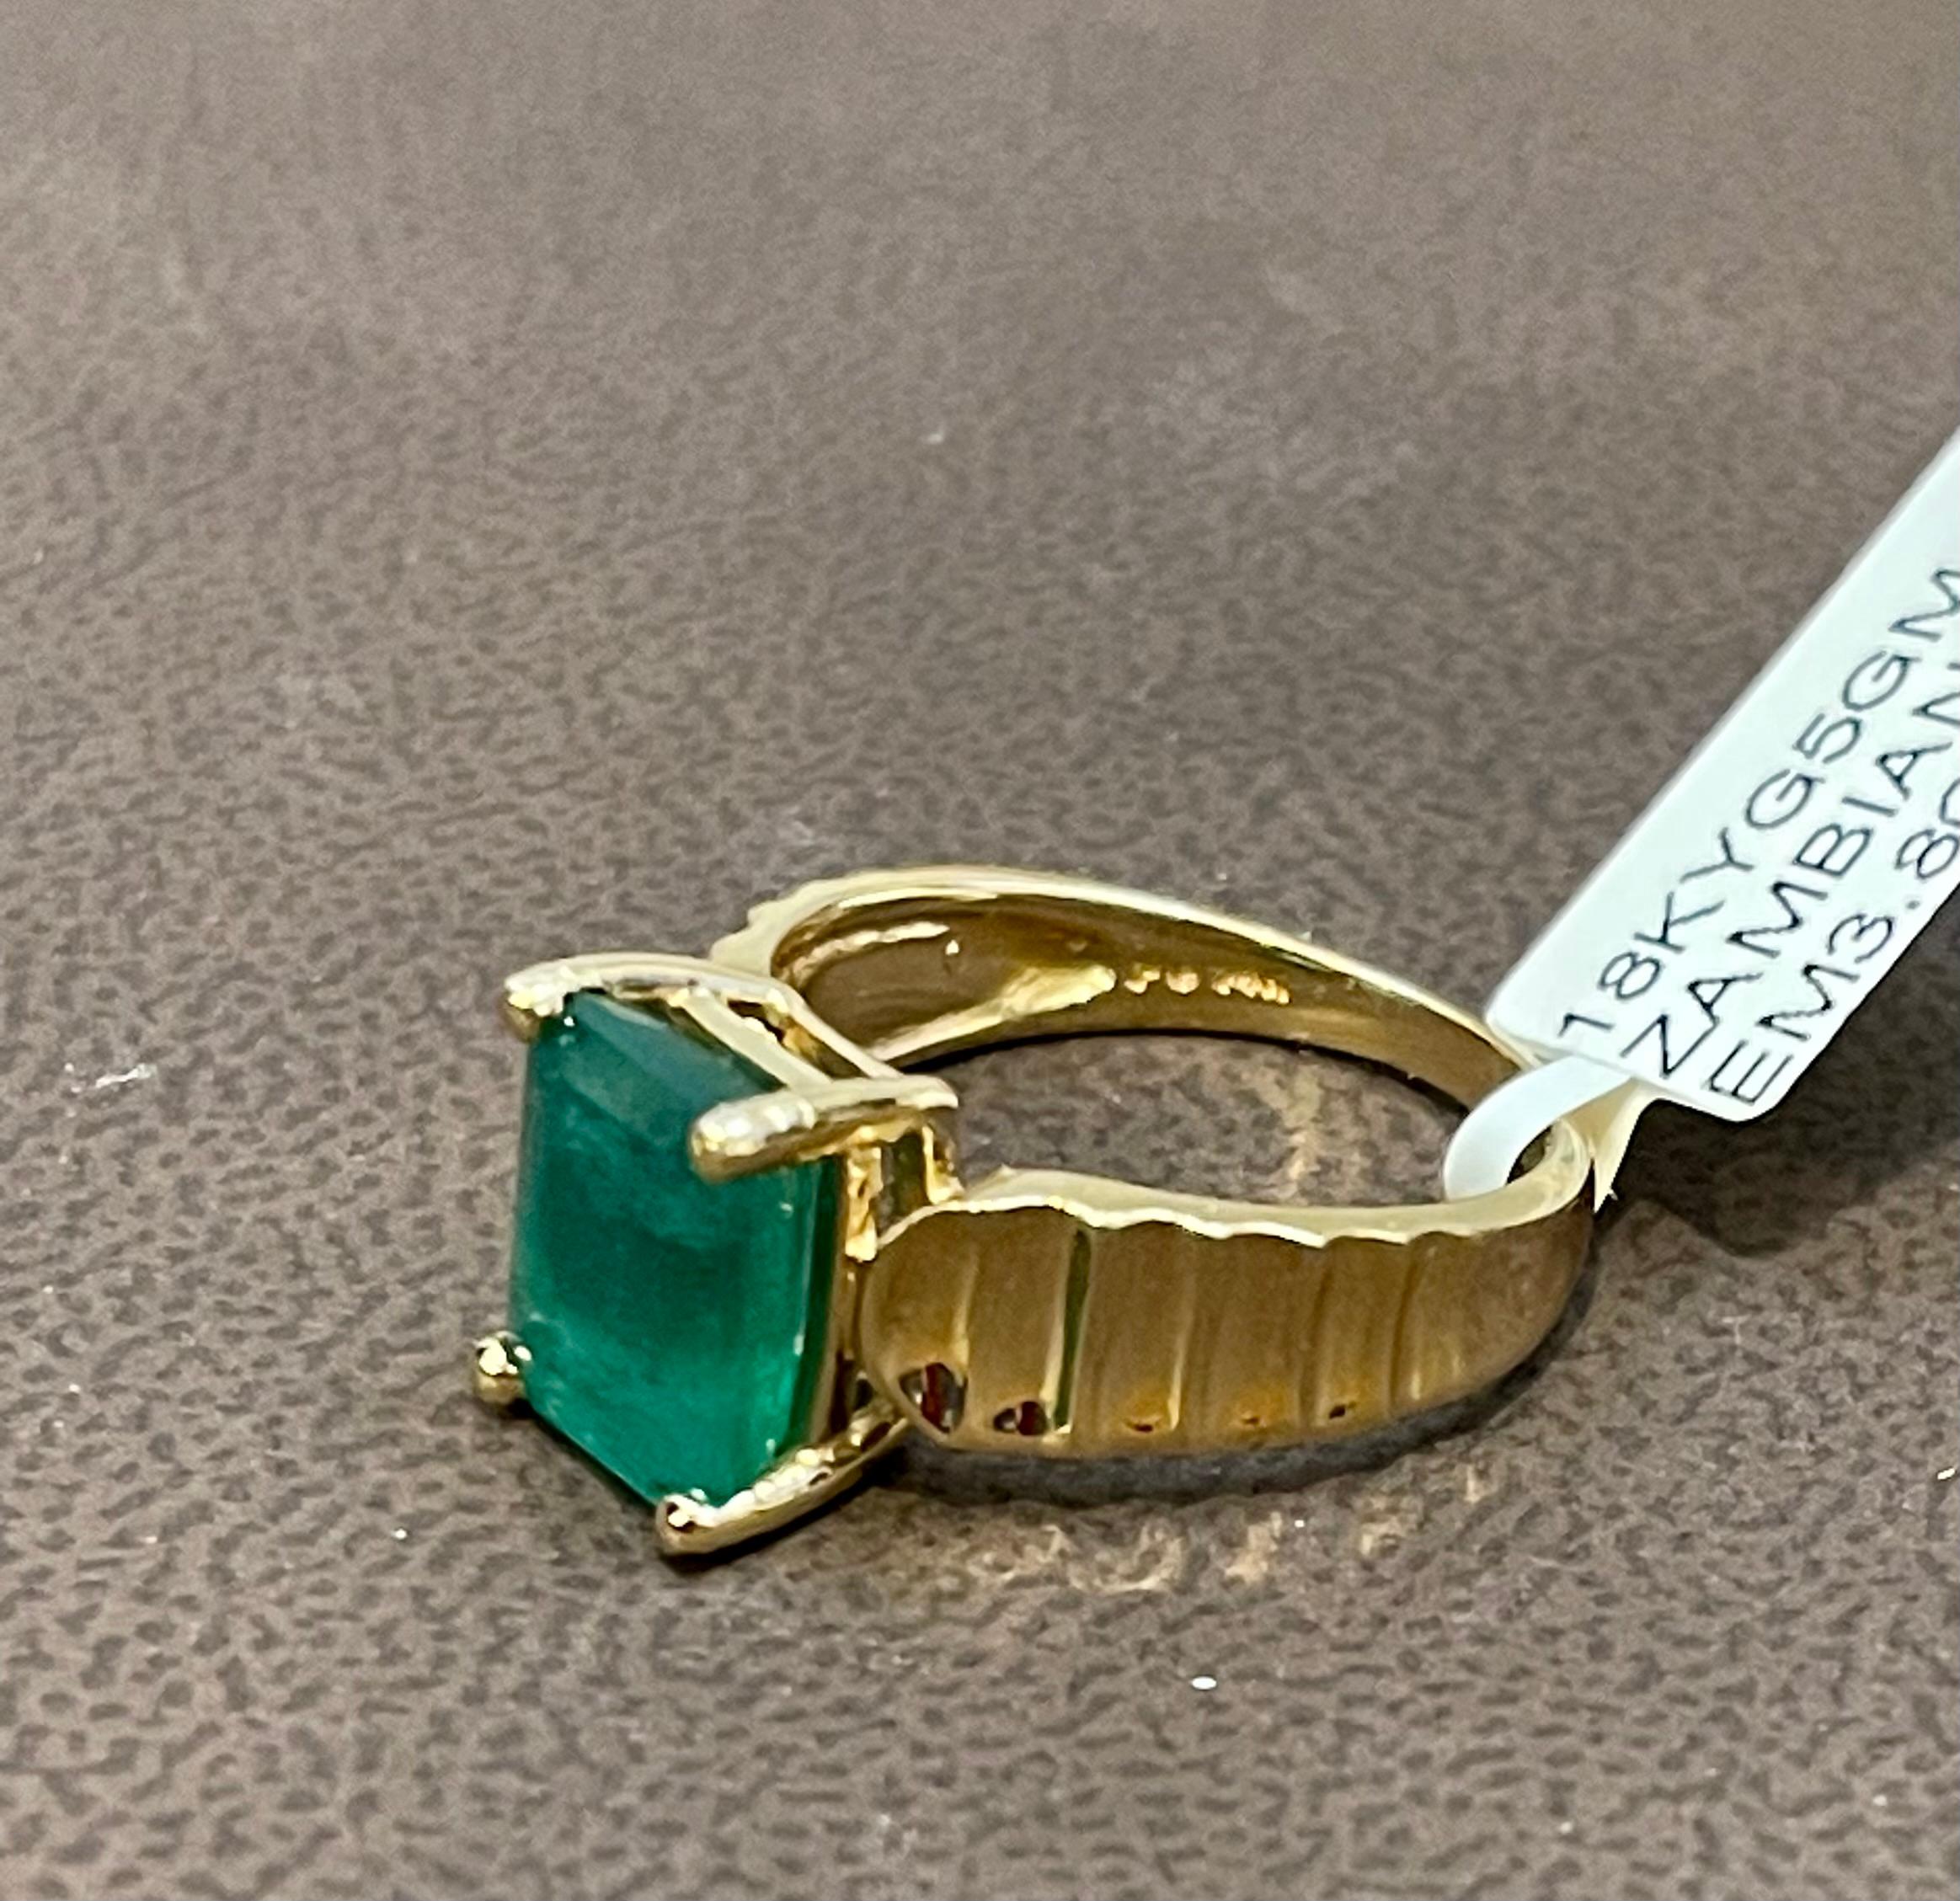 3.8 Carat Natural Zambian Emerald Cut Emerald Ring 14 Karat Yellow Gold In Excellent Condition For Sale In New York, NY